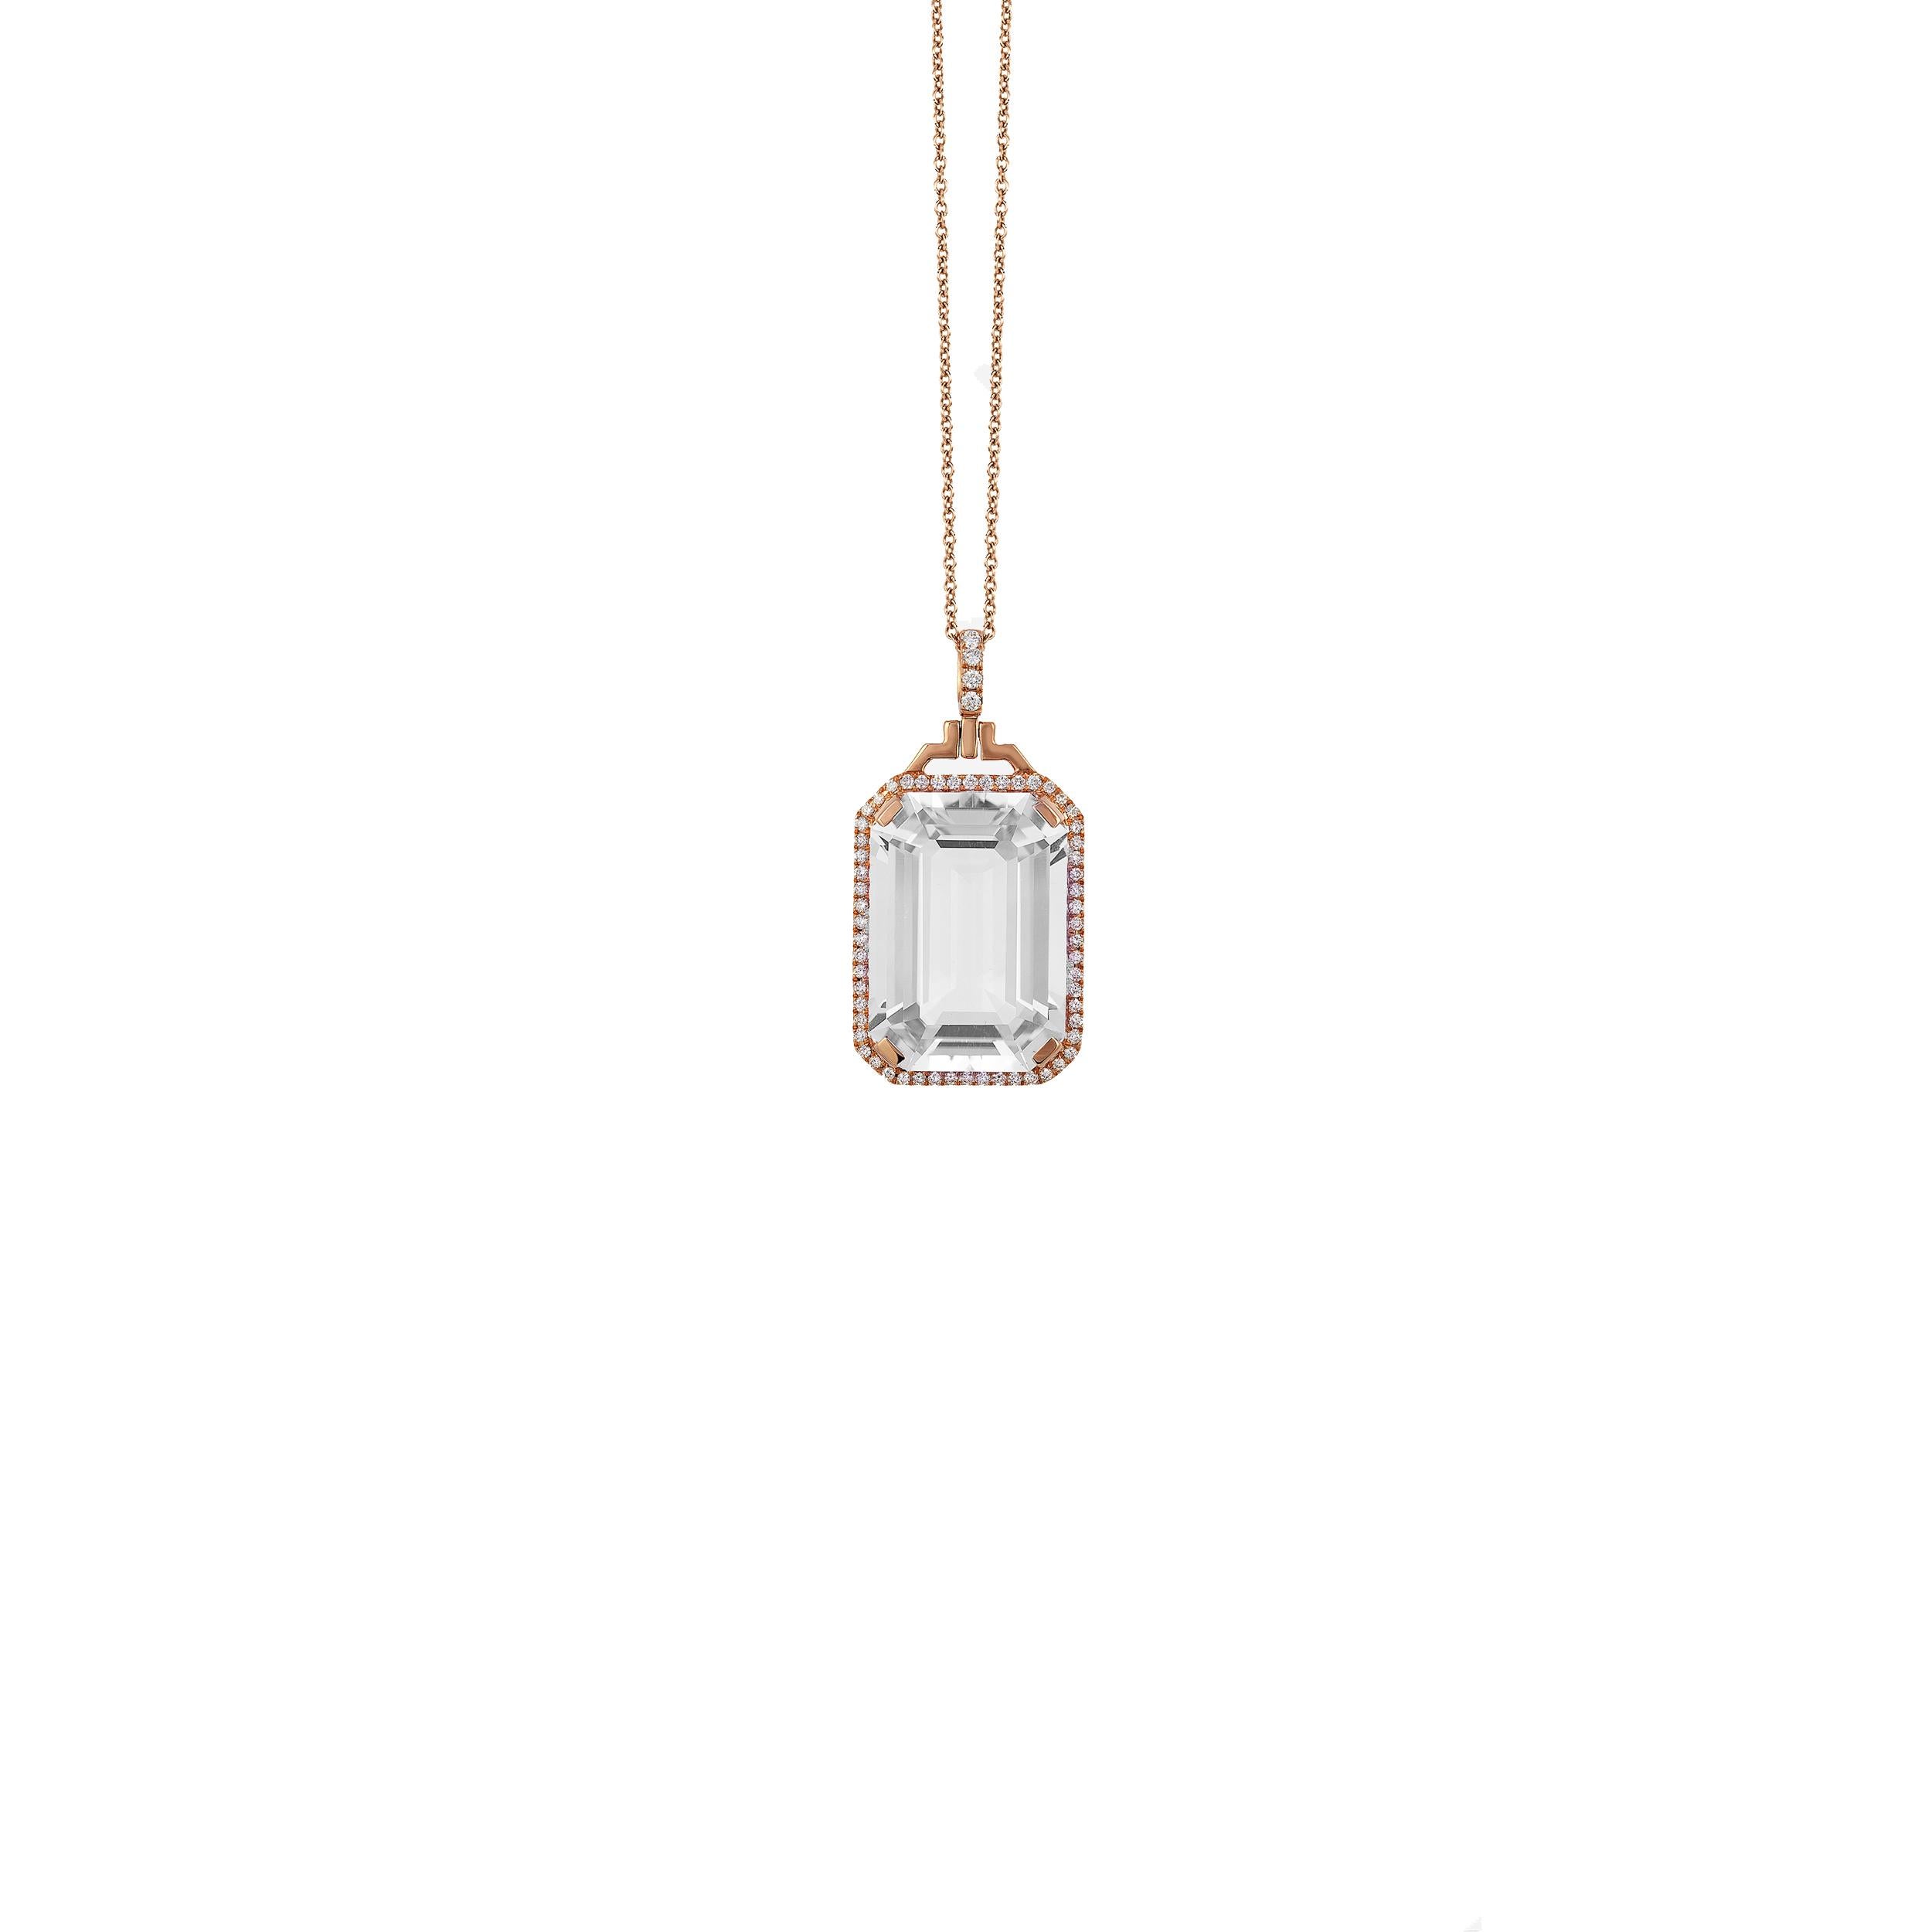 Rock Crystal Emerald Cut Pendant with Diamonds in 18K Pink Gold, from 'Gossip' Collection 
 
 on a 18'' Chain
 
 Stone Size: 10 x 15 mm 
 
 Gemstone Approx Wt: Rock Crystal- 6.2 Carats 
 
 Diamonds: G-H / VS, Approx Wt : 0.15 Carats